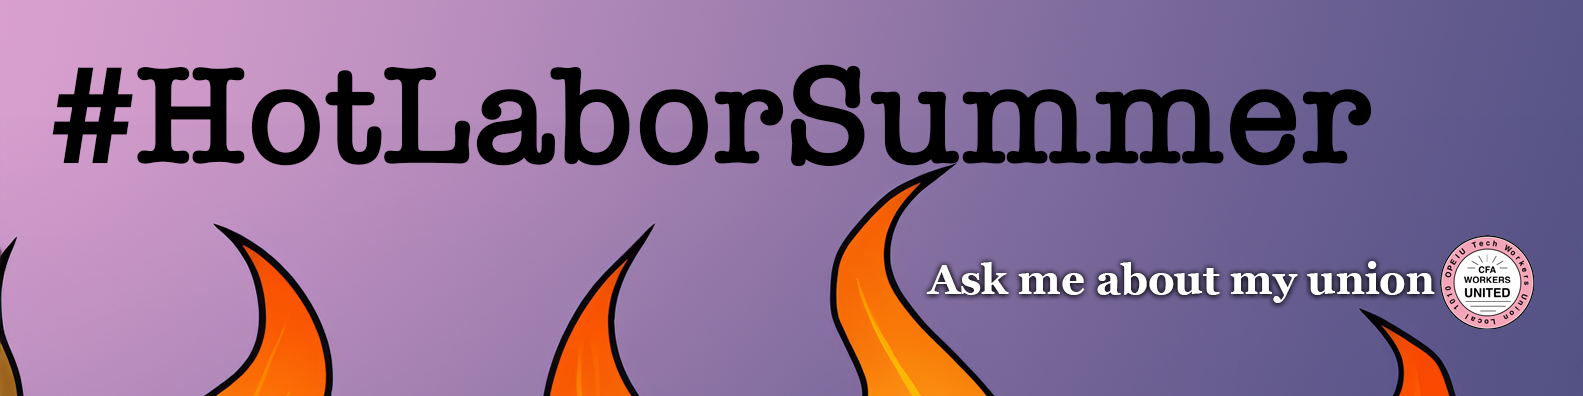 Ask me - Hot Labor Summer